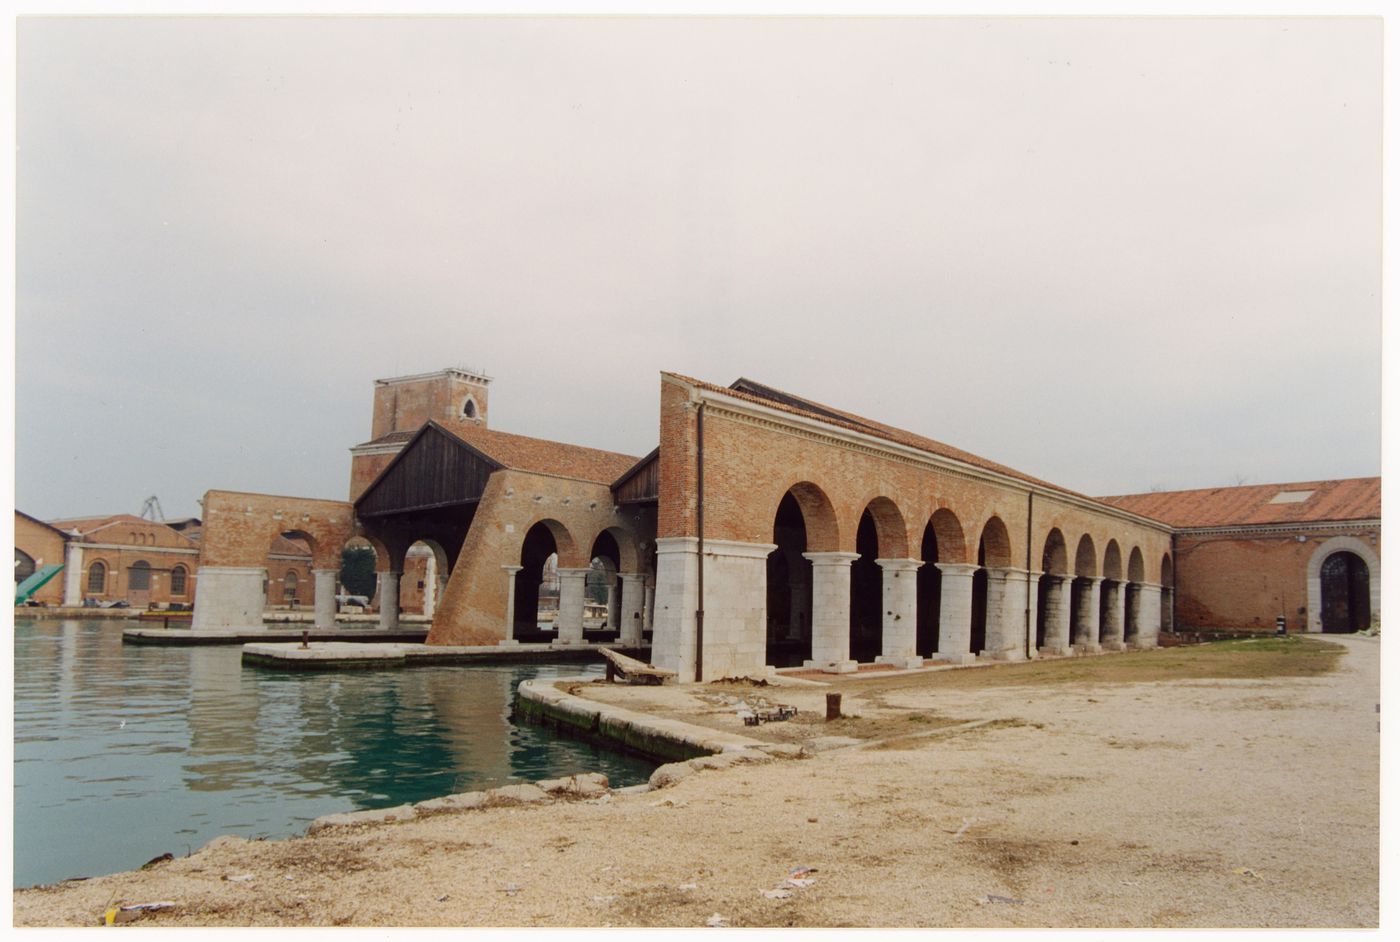 Photograph of a site for the exhibition on James Wines at the Venice Biennale